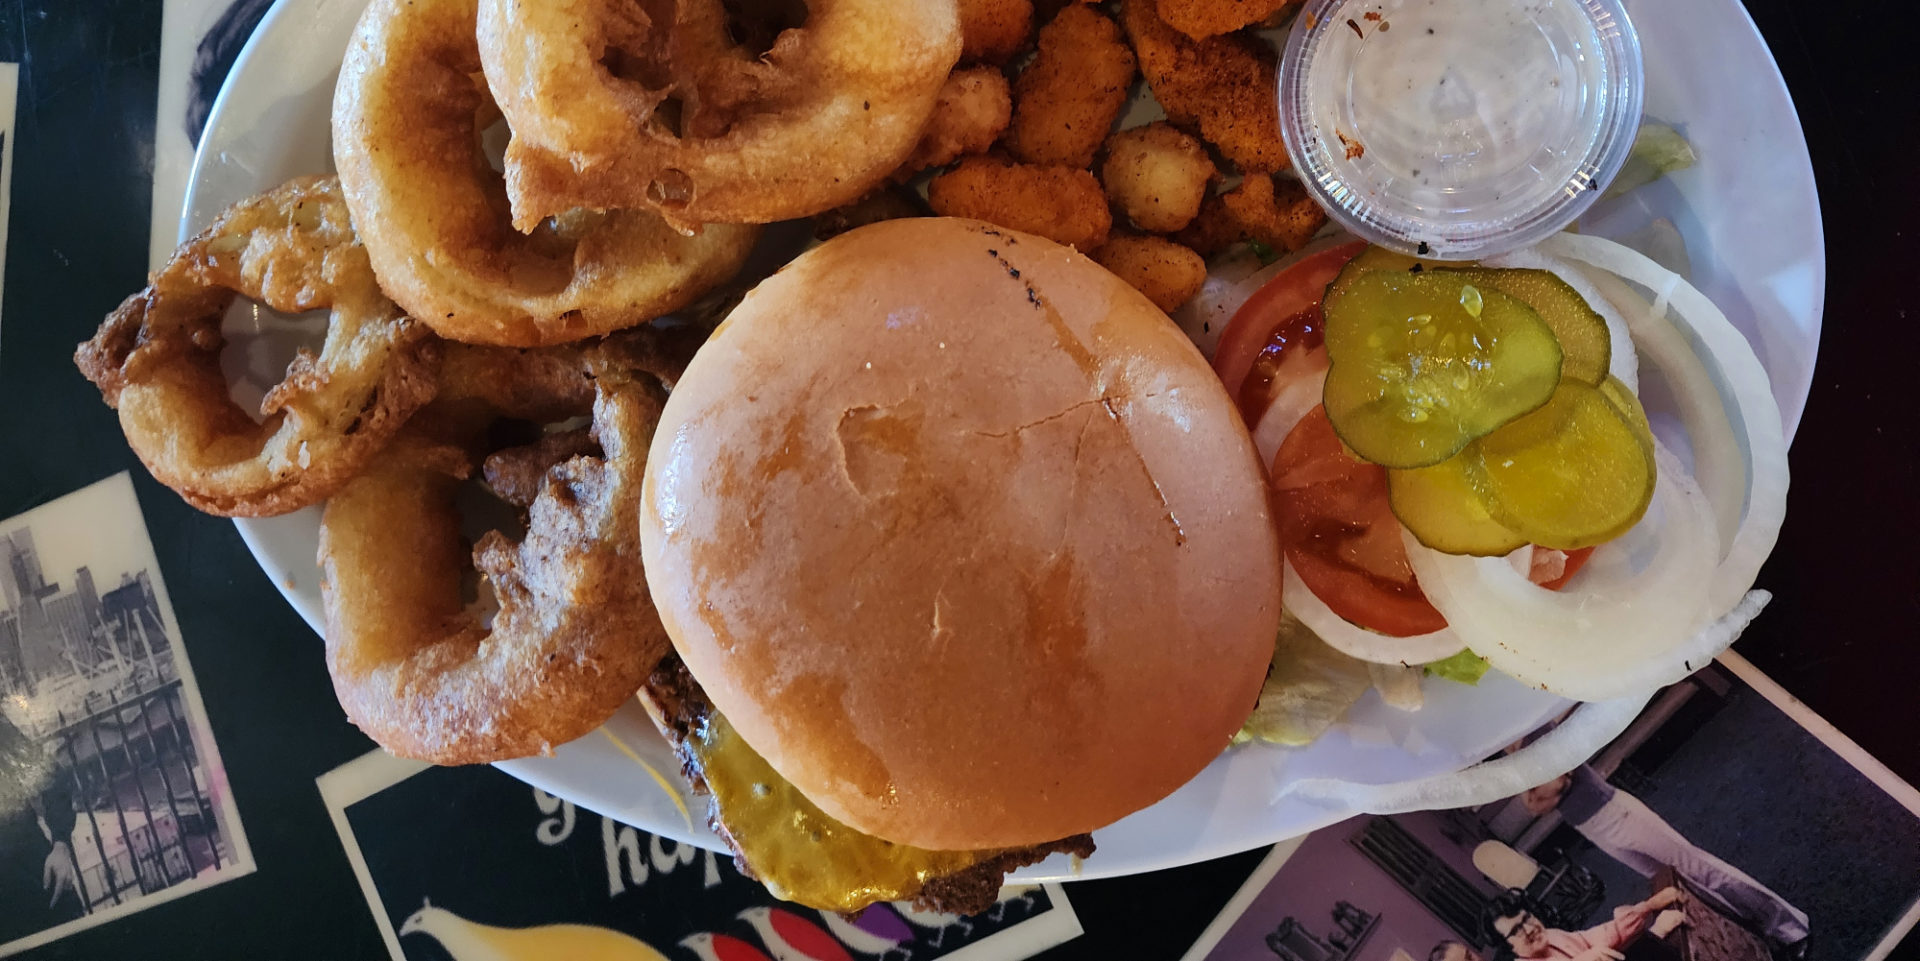 A burger with onion rings at Boomerangs Bar & Grill in Urbana.